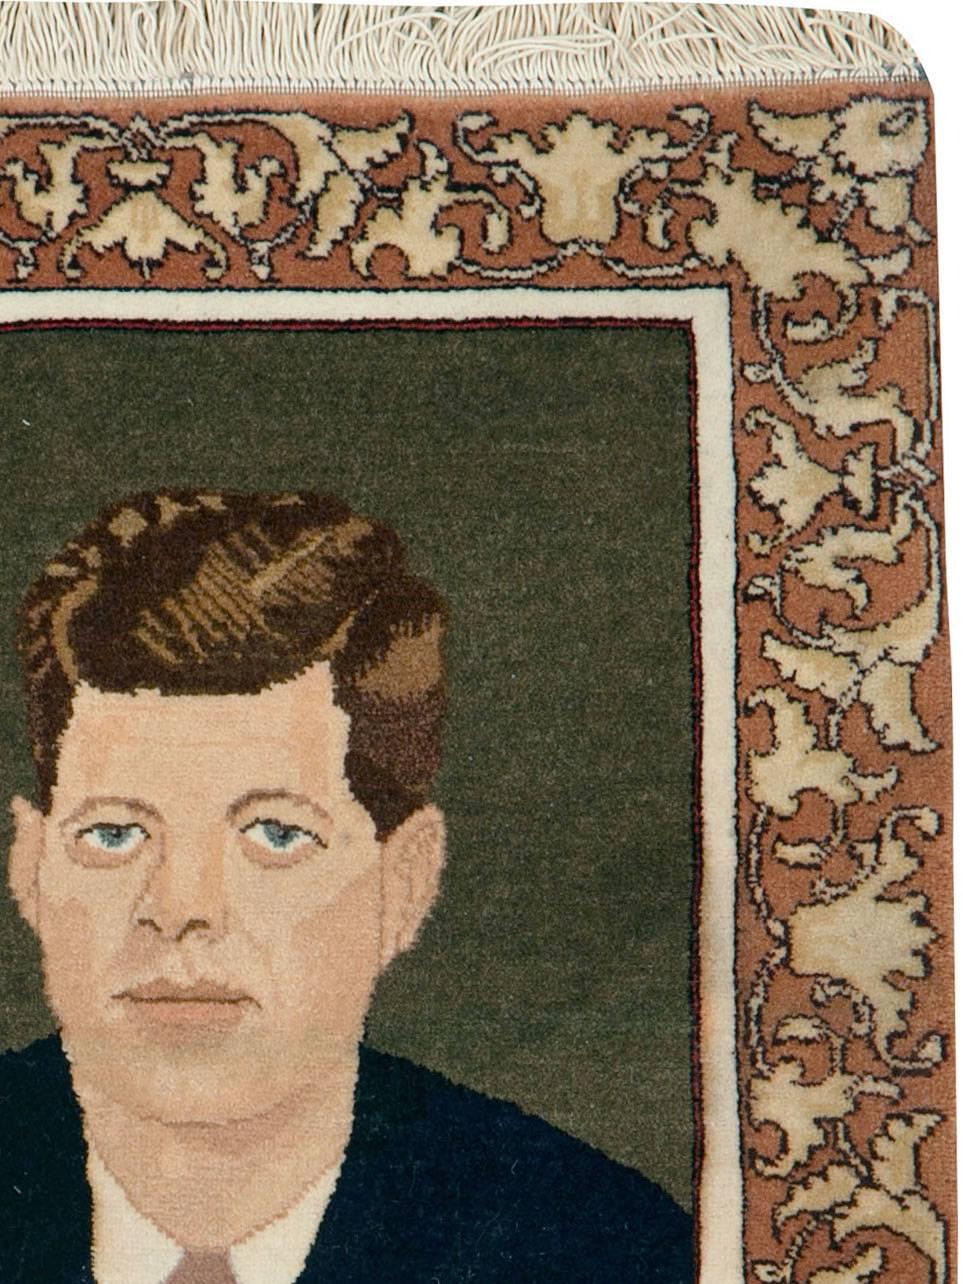 A vintage Persian Tabriz portrait rug handmade during the late 20th century with a pictorial depiction of John Fitzgerald Kennedy (JFK).

Measures: 1' 6